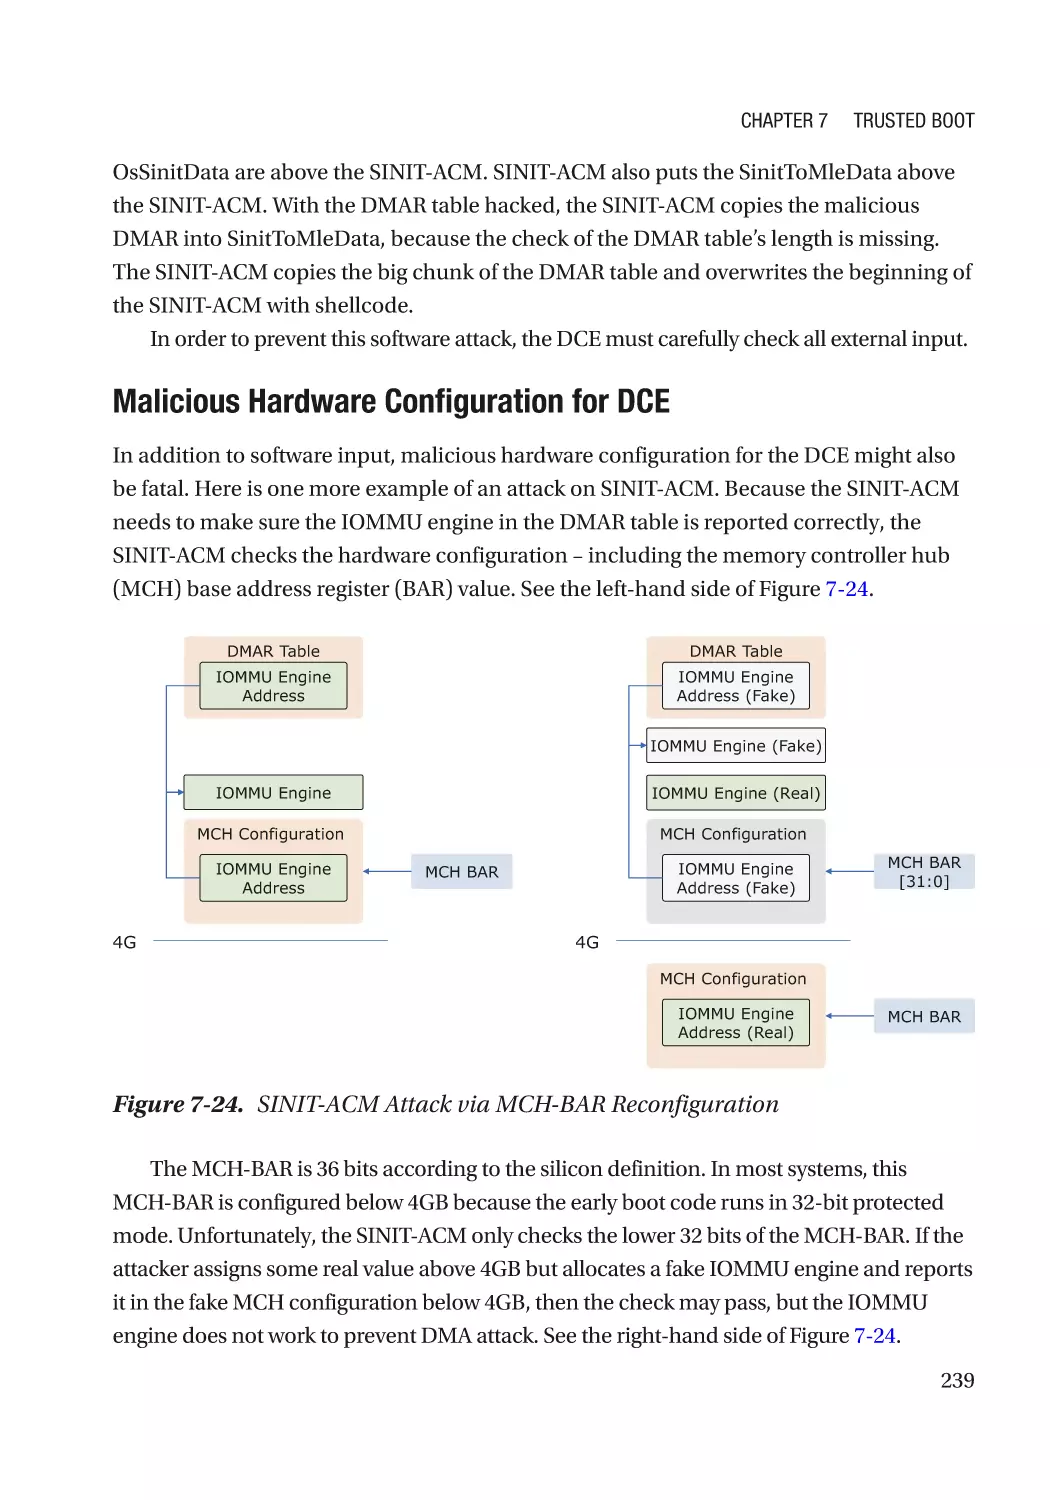 Malicious Hardware Configuration for DCE